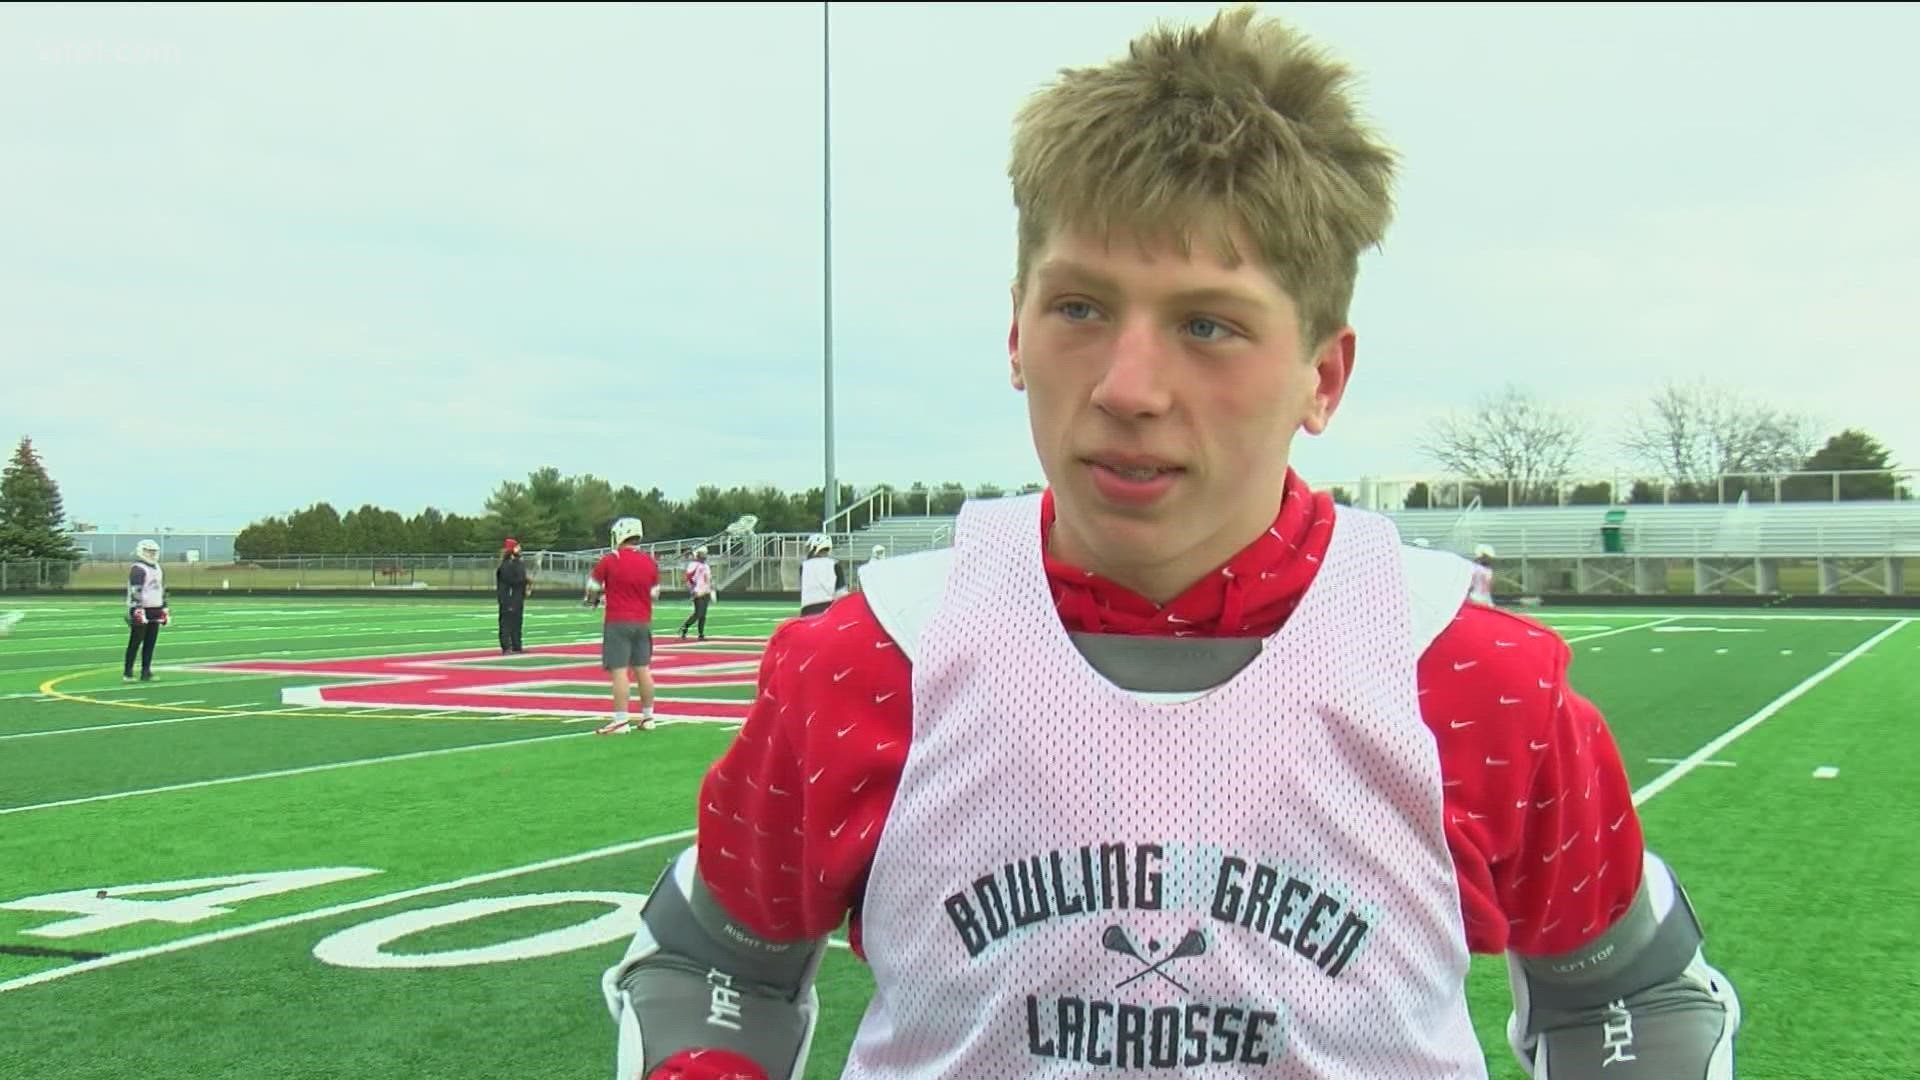 Brandt scored a state-record 14 goals in a lacrosse game against Findlay.